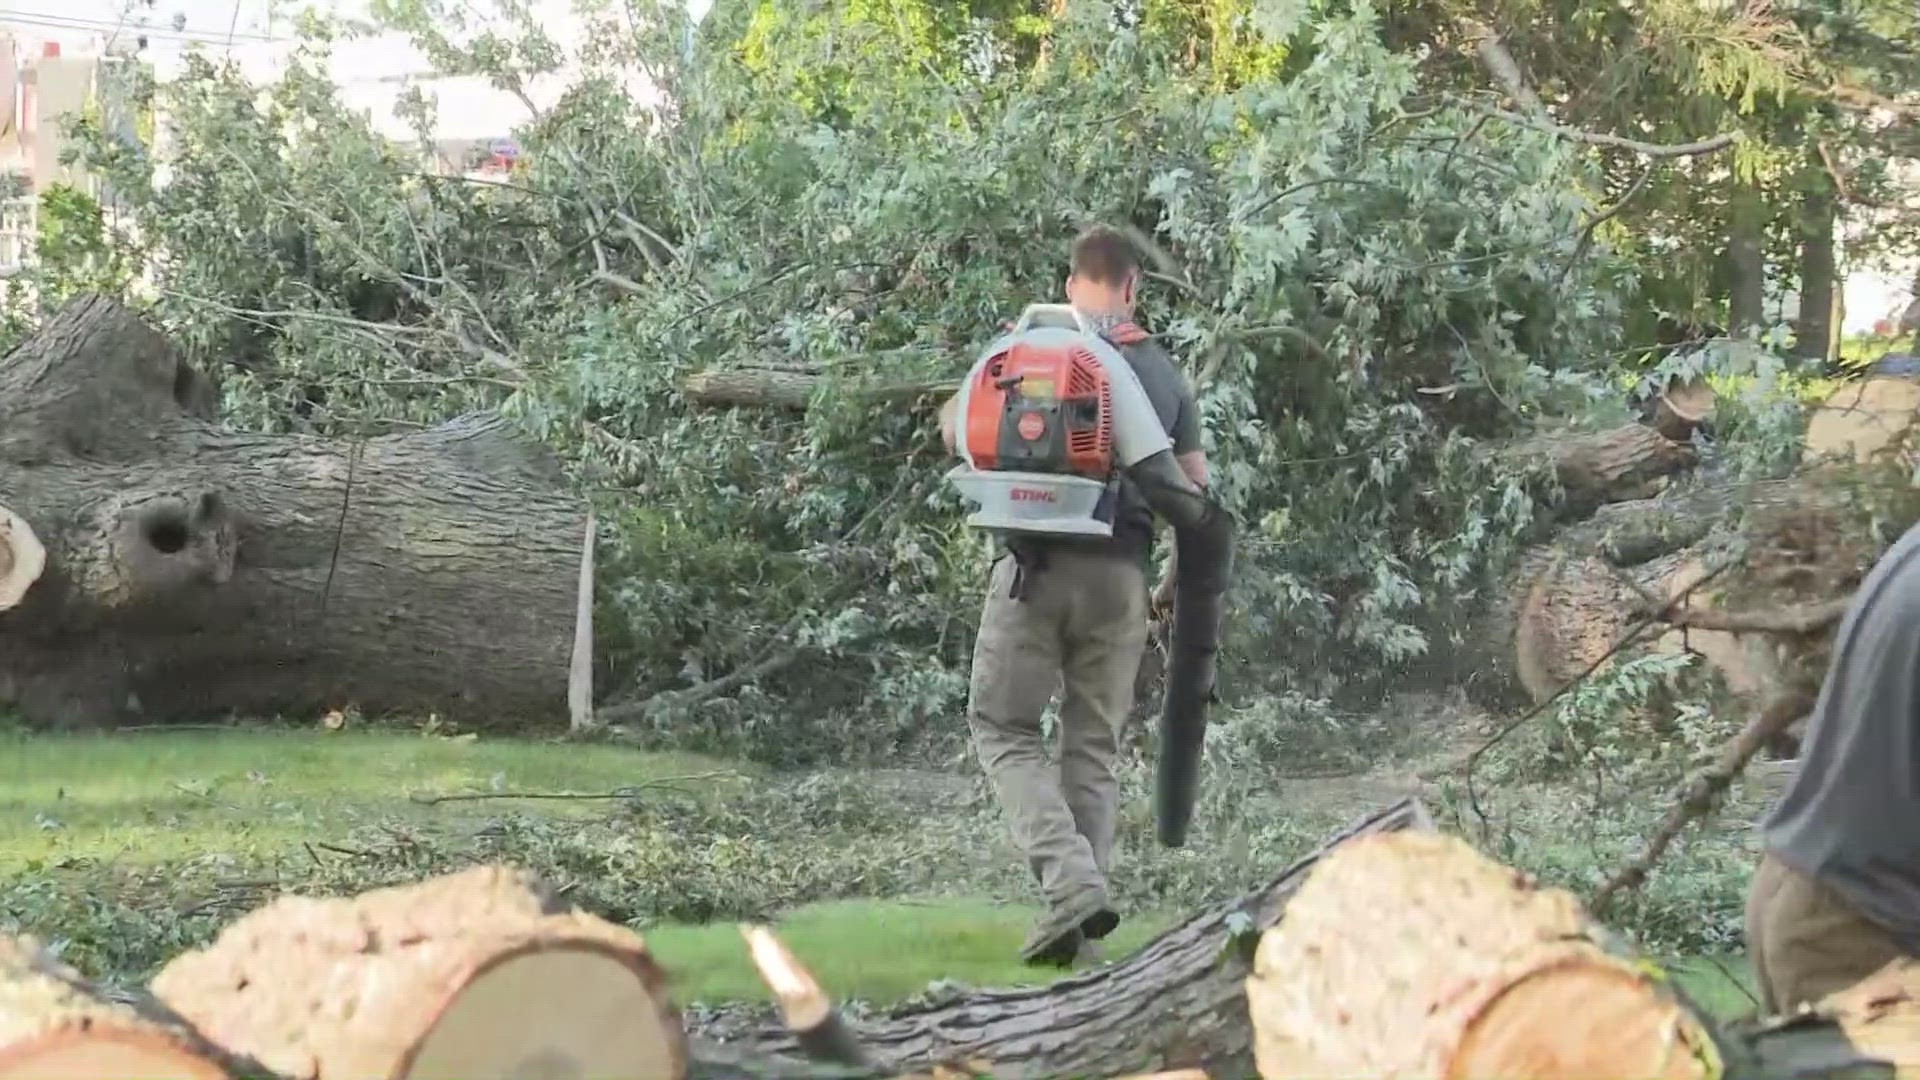 The cost of tree removal looms heavy for many in Mentor following last week's tornado.